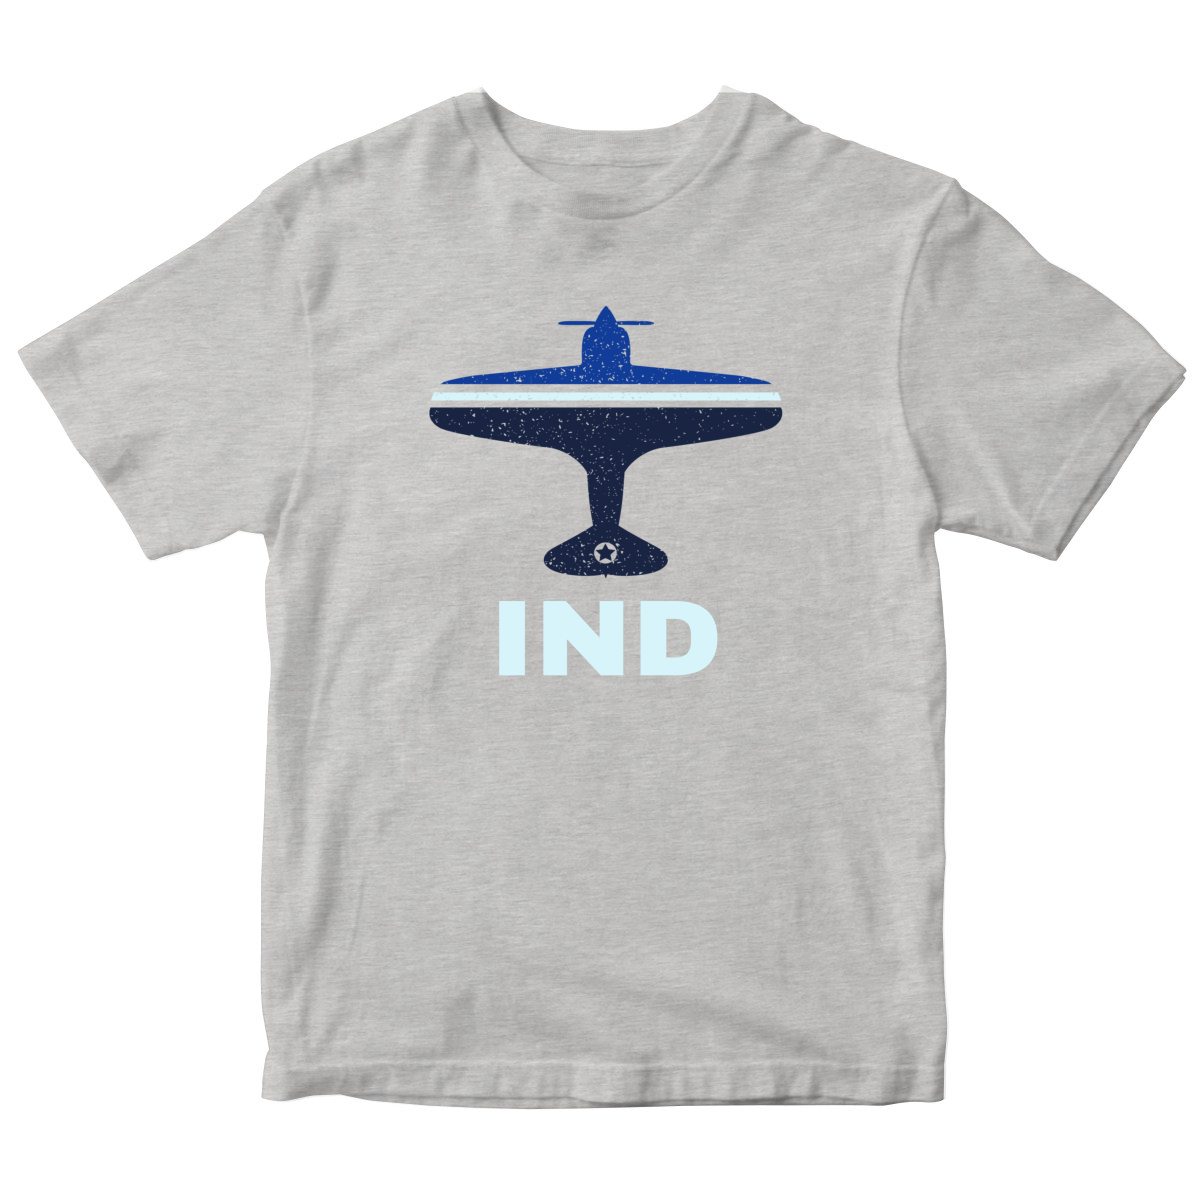 Fly Indianapolis IND Airport Kids T-shirt | Gray